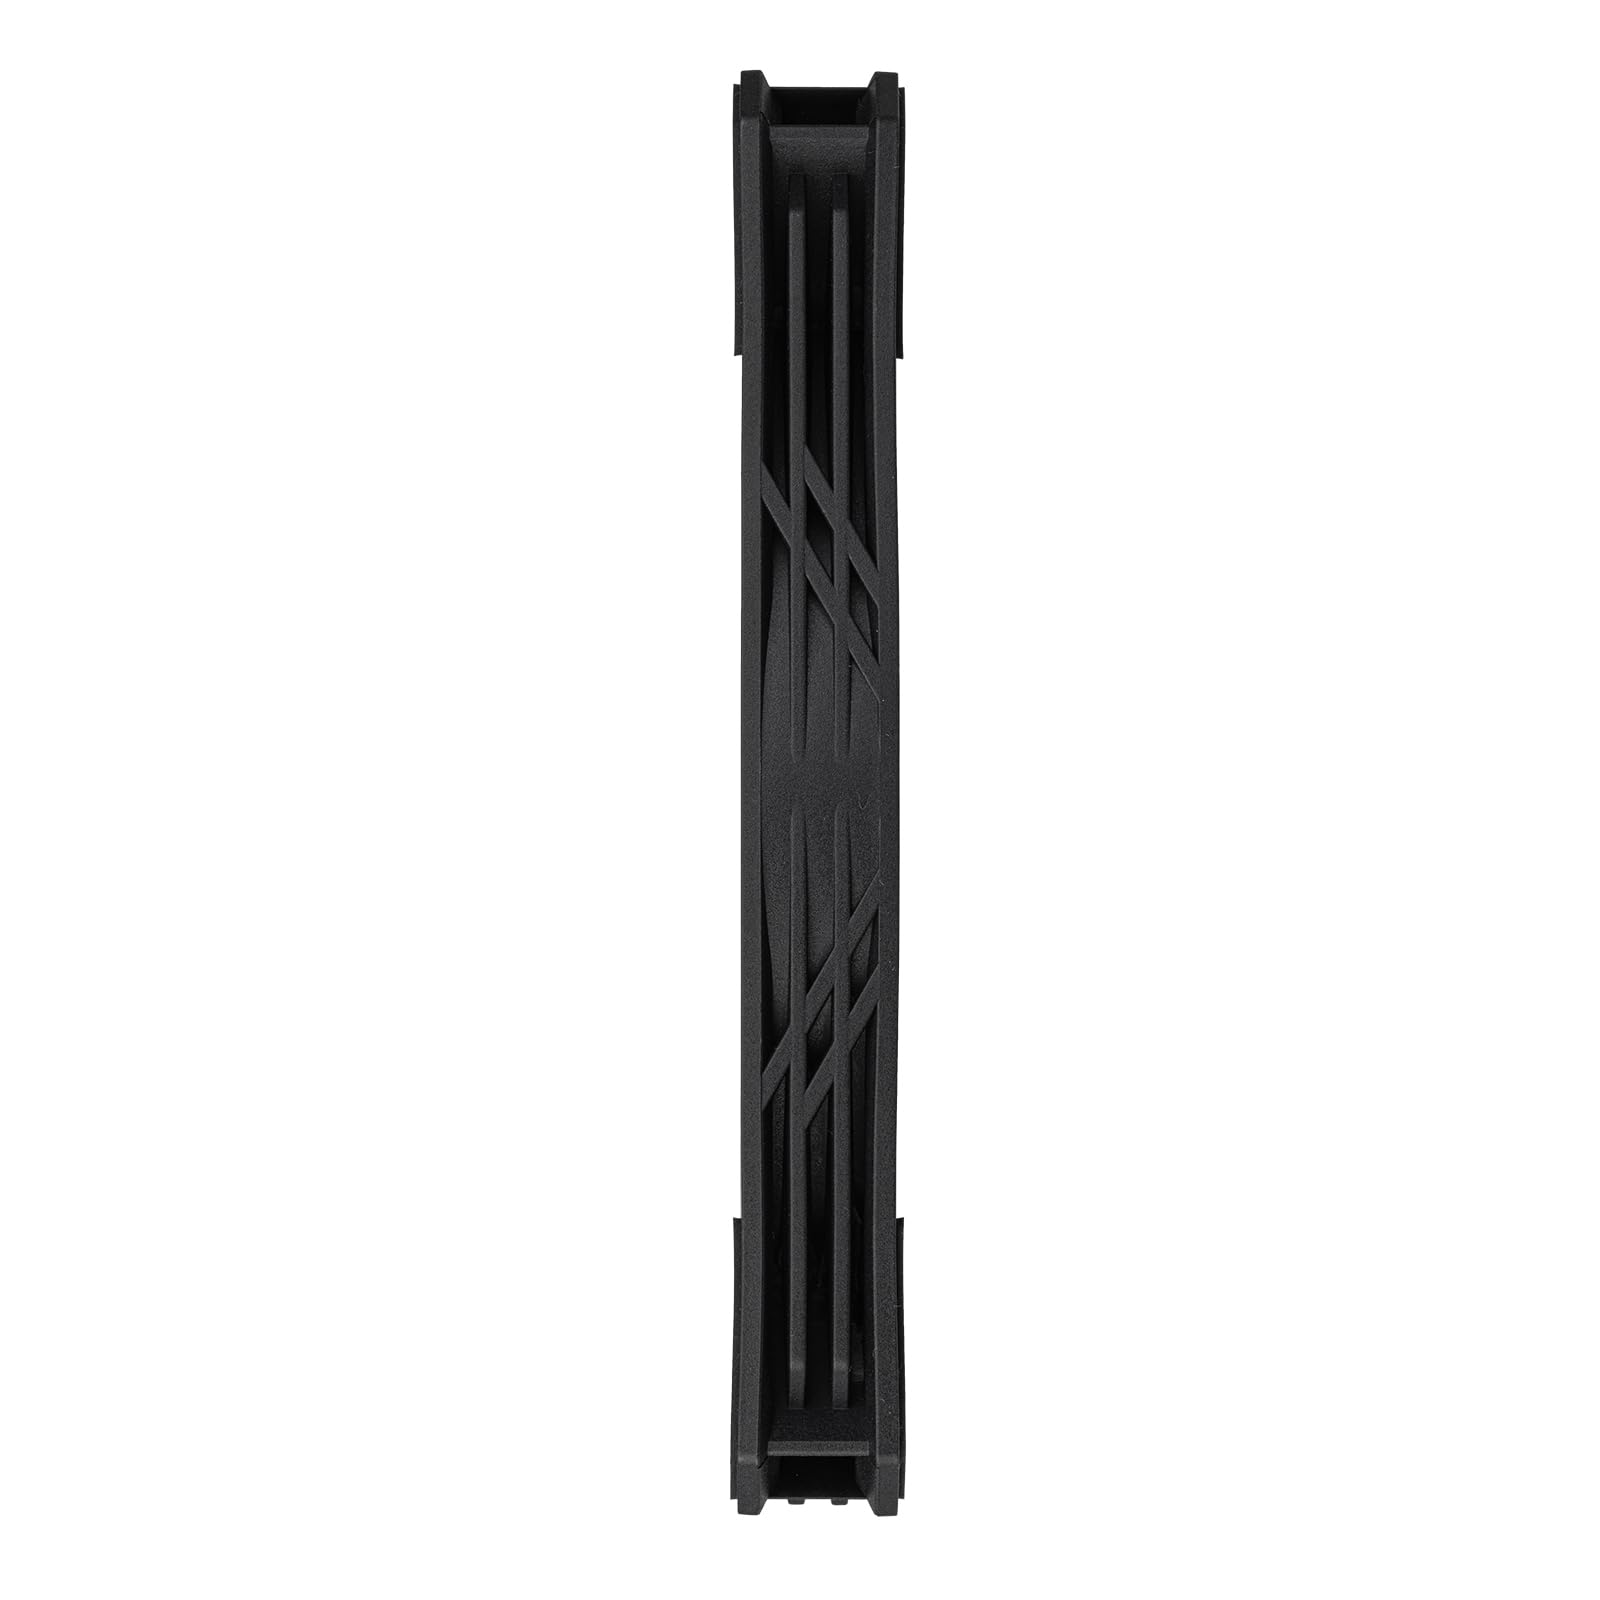 SilverStone Technology Air Slimmer 140 Enhanced Performance 140mm Slim Fan with Full-Range PWM and Shark Force Technology, (SST-AS140B)